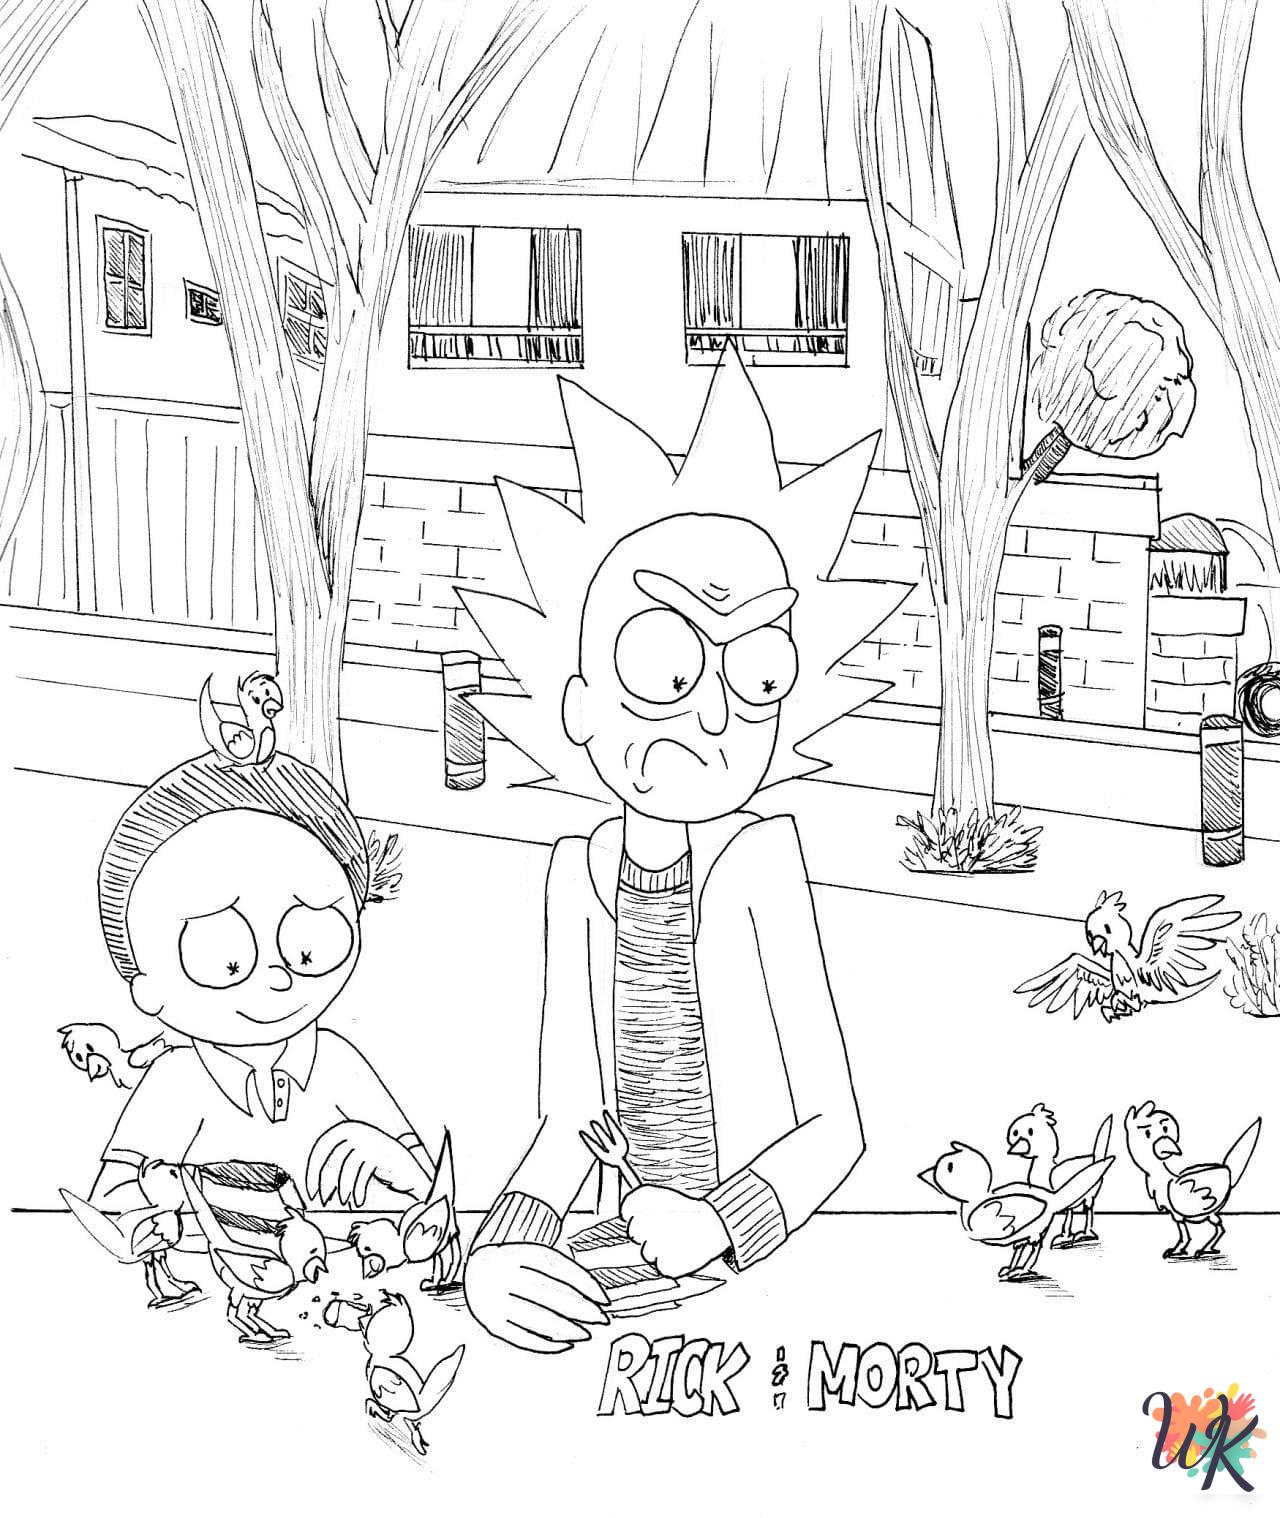 Rick and Morty coloring pages for preschoolers